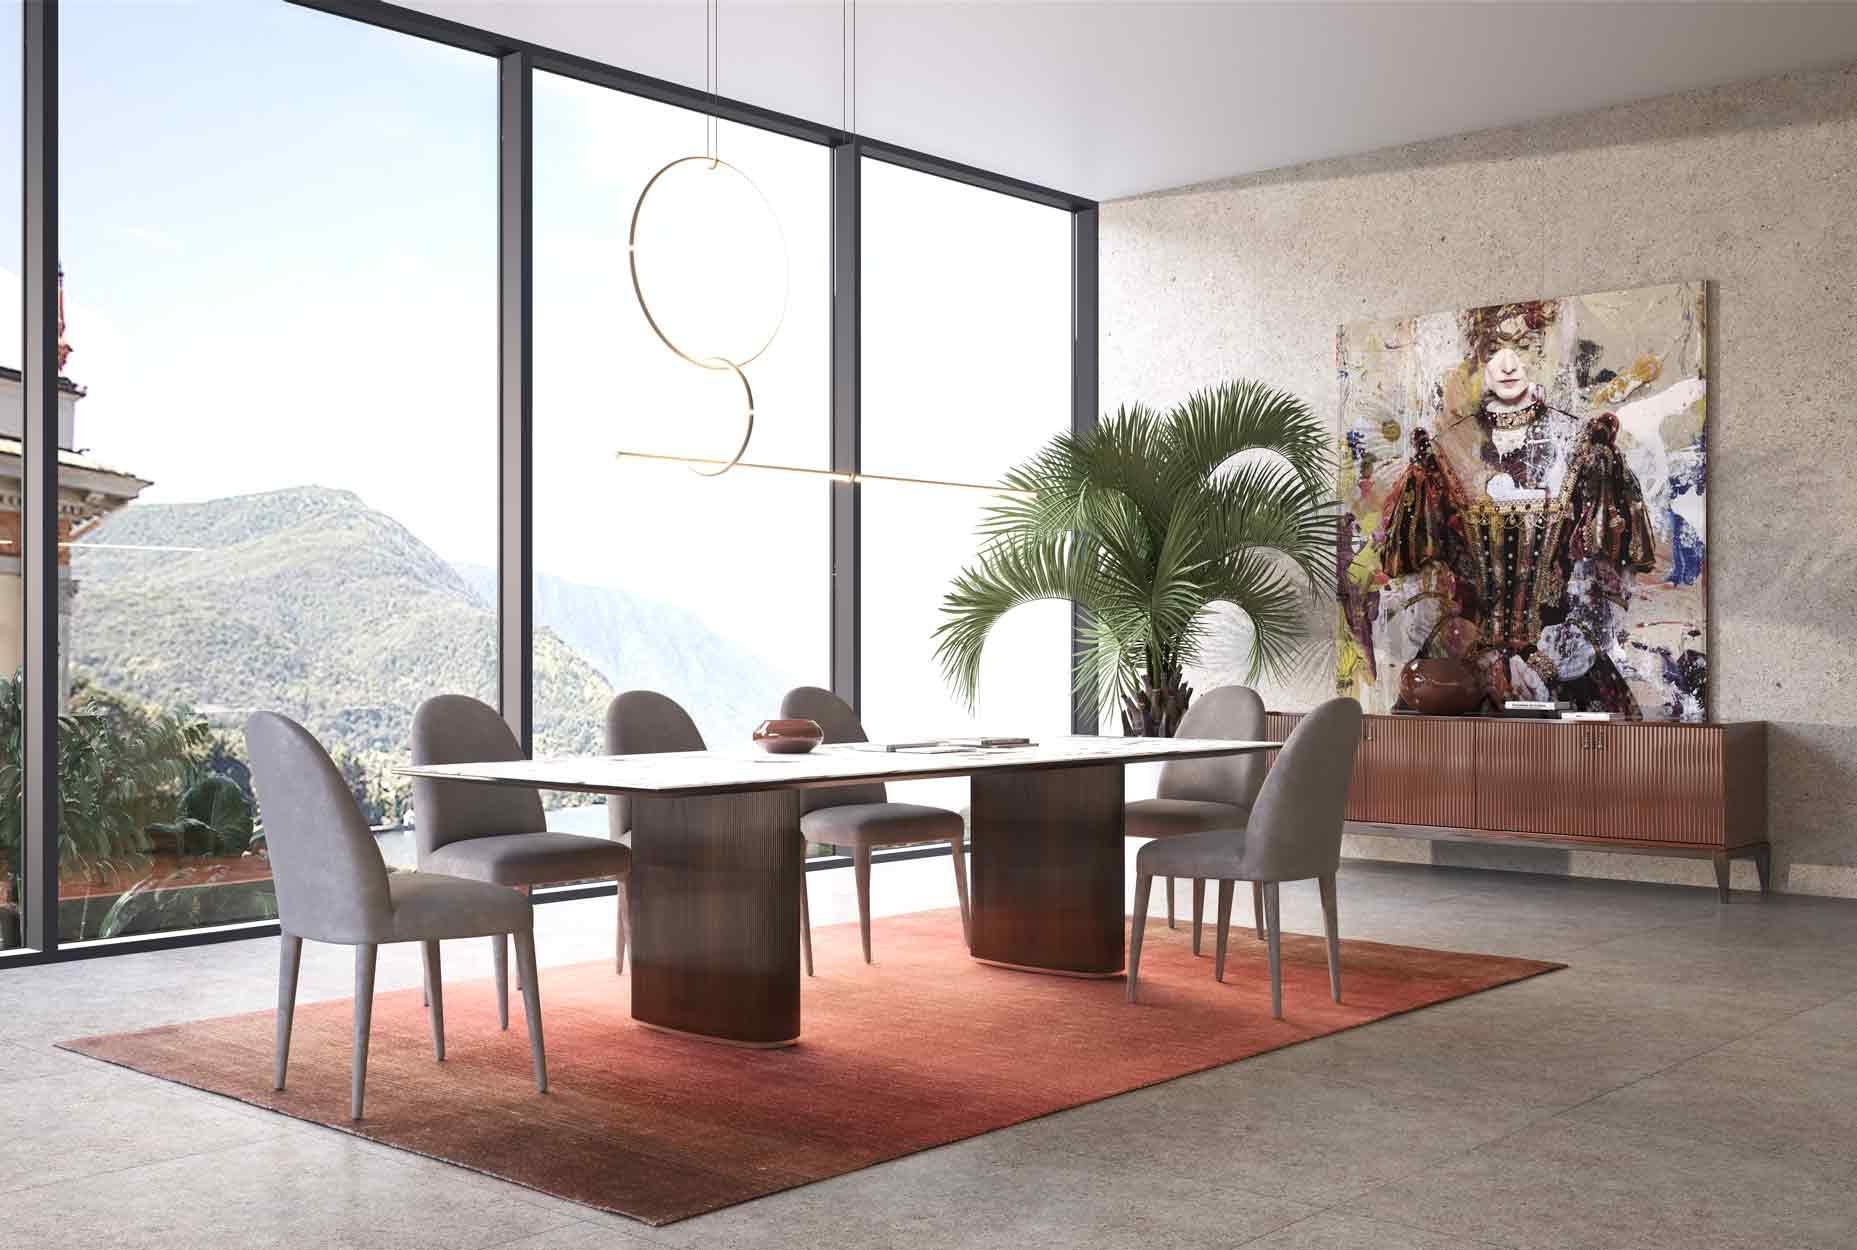 ‘Balzaretti’ Xl Contemporary Upholstered Dining Chair in Taupe Leather In New Condition For Sale In Concordia Sagittaria, Veneto